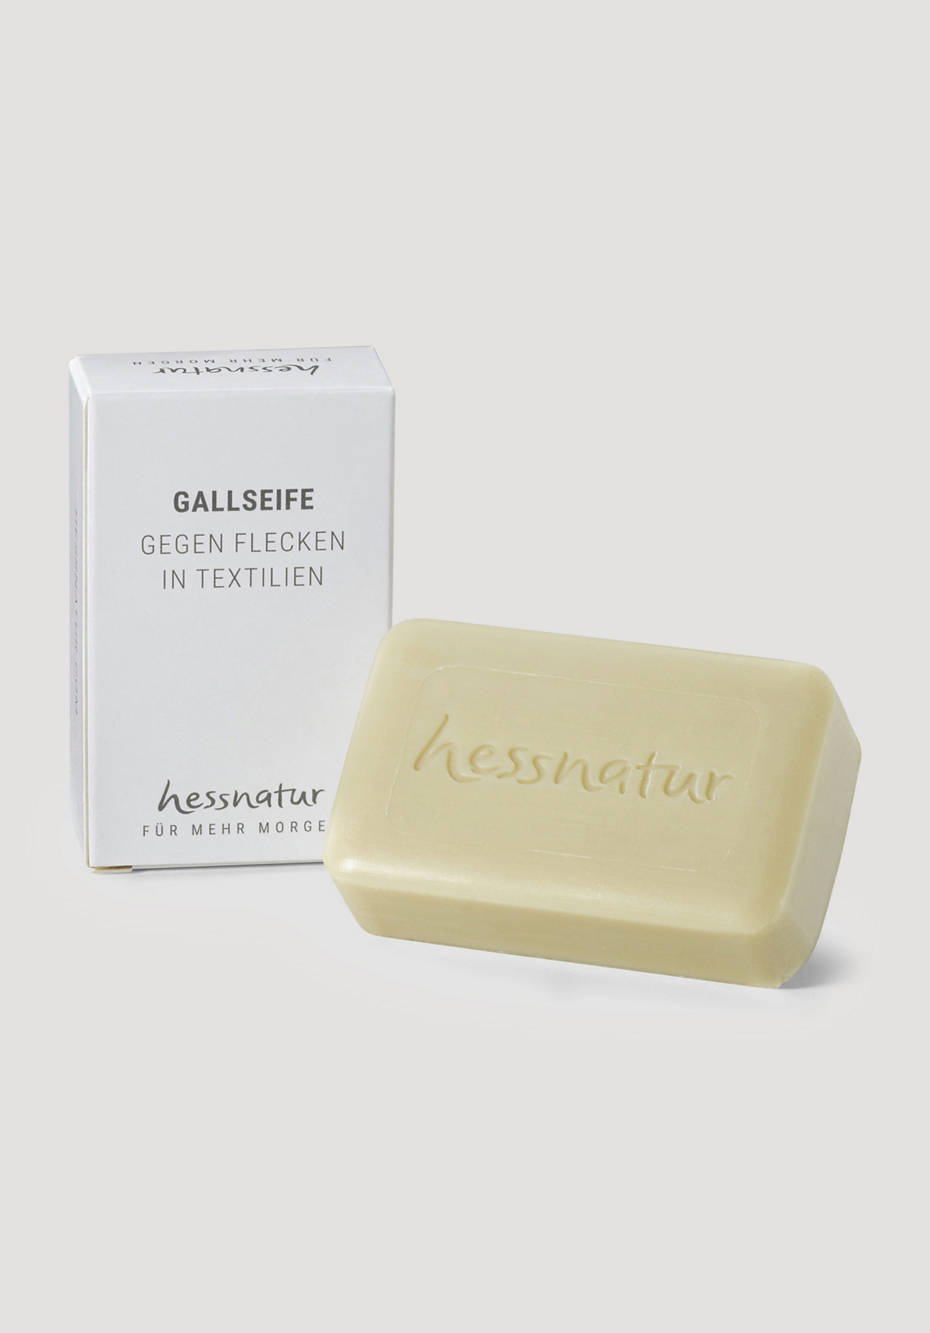 Gall soap